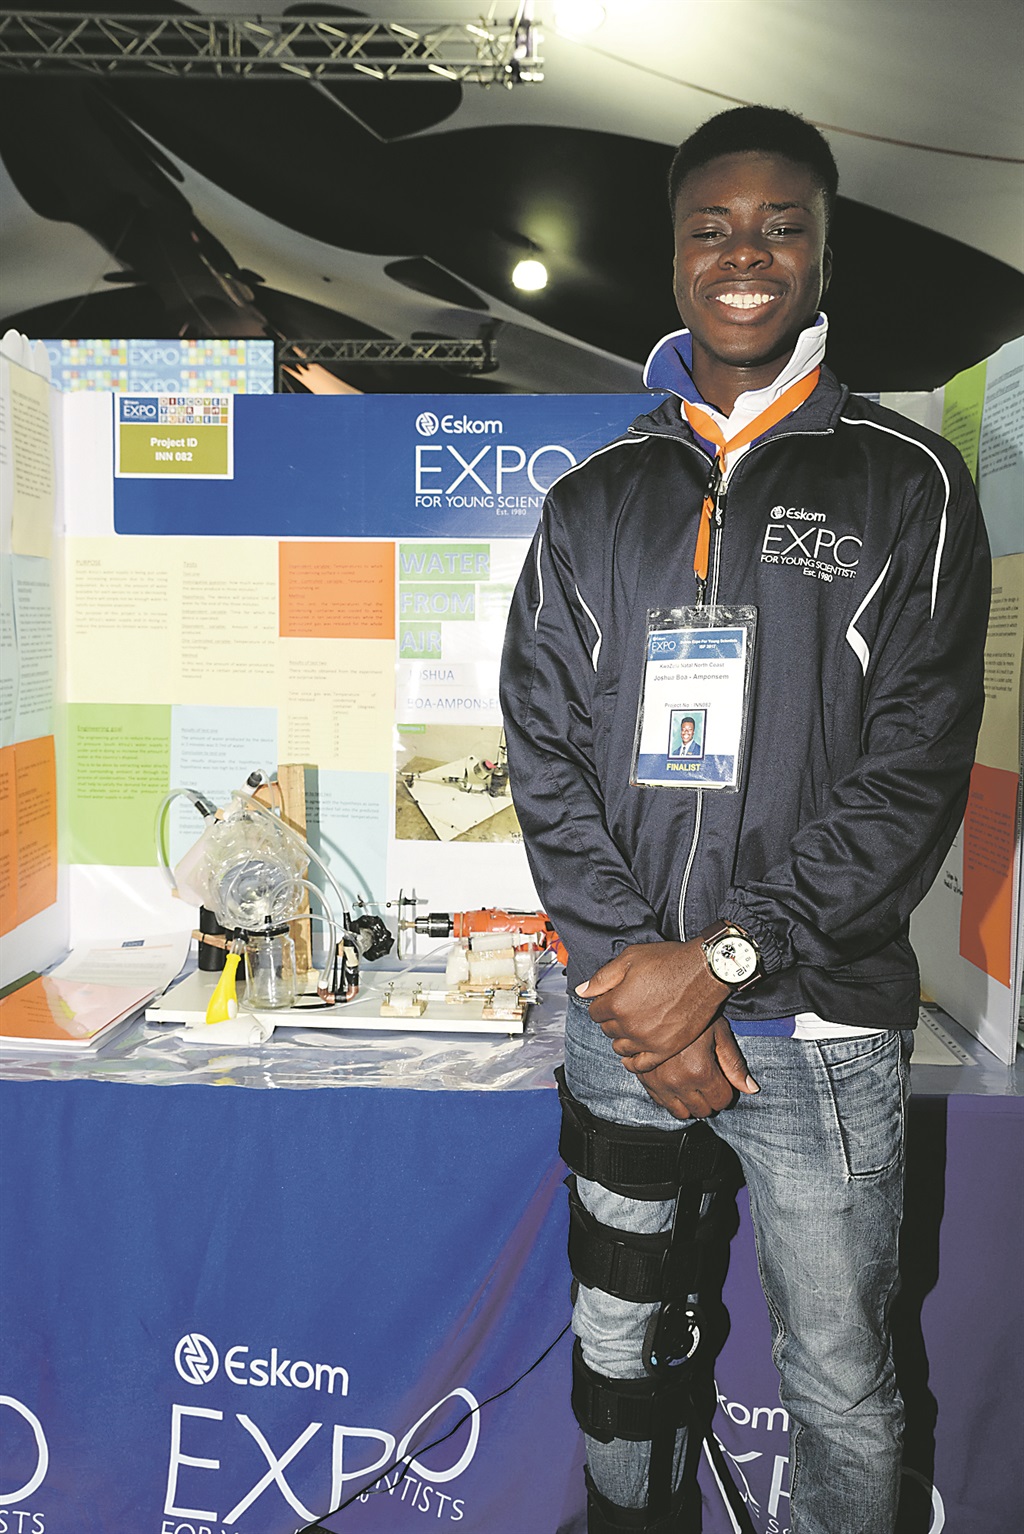 Joshua Boa-Amponsem, from KZN, distilled water from air.